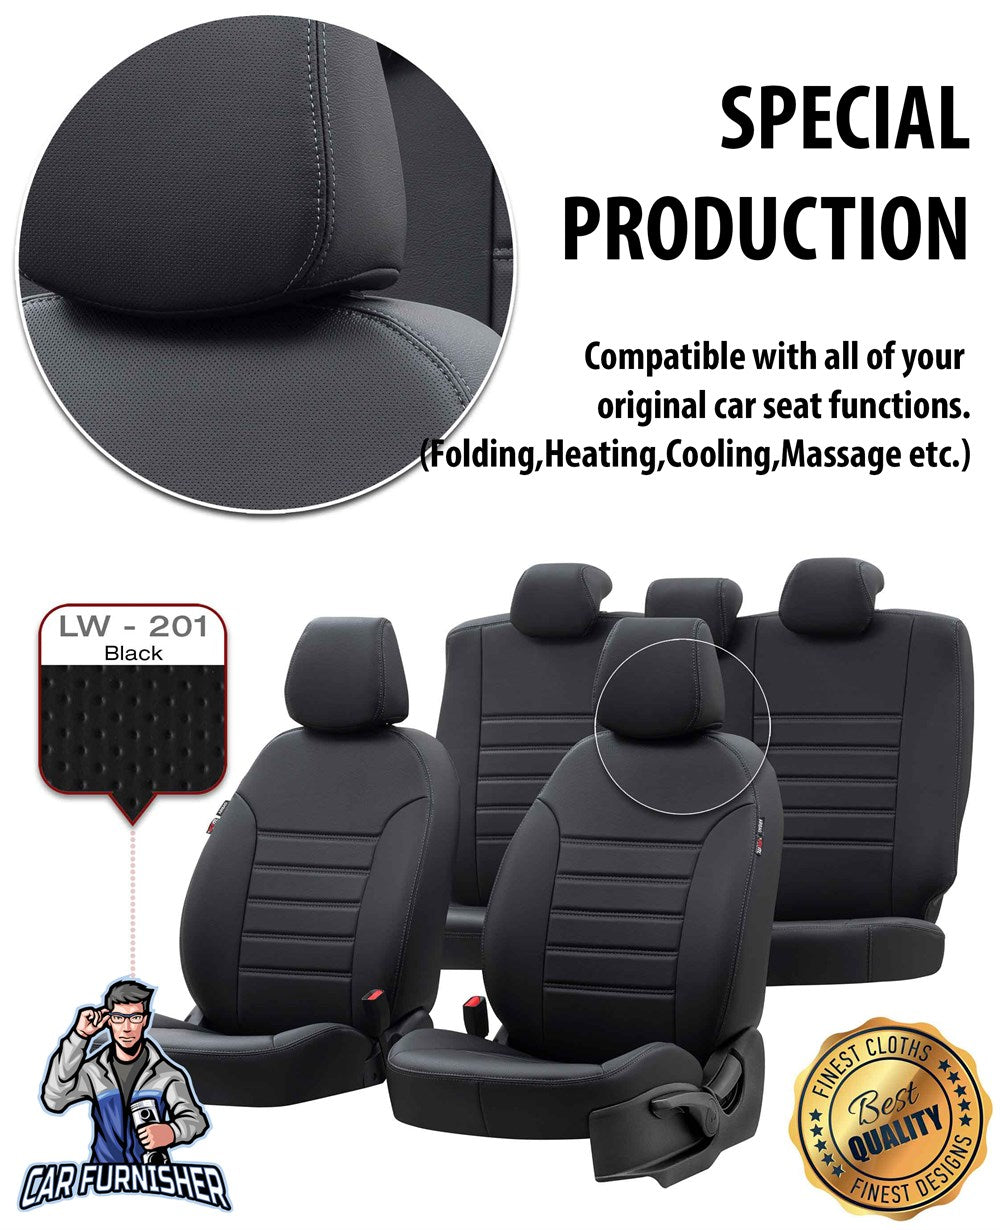 Volkswagen Beetle Seat Cover Istanbul Leather Design Black Leather